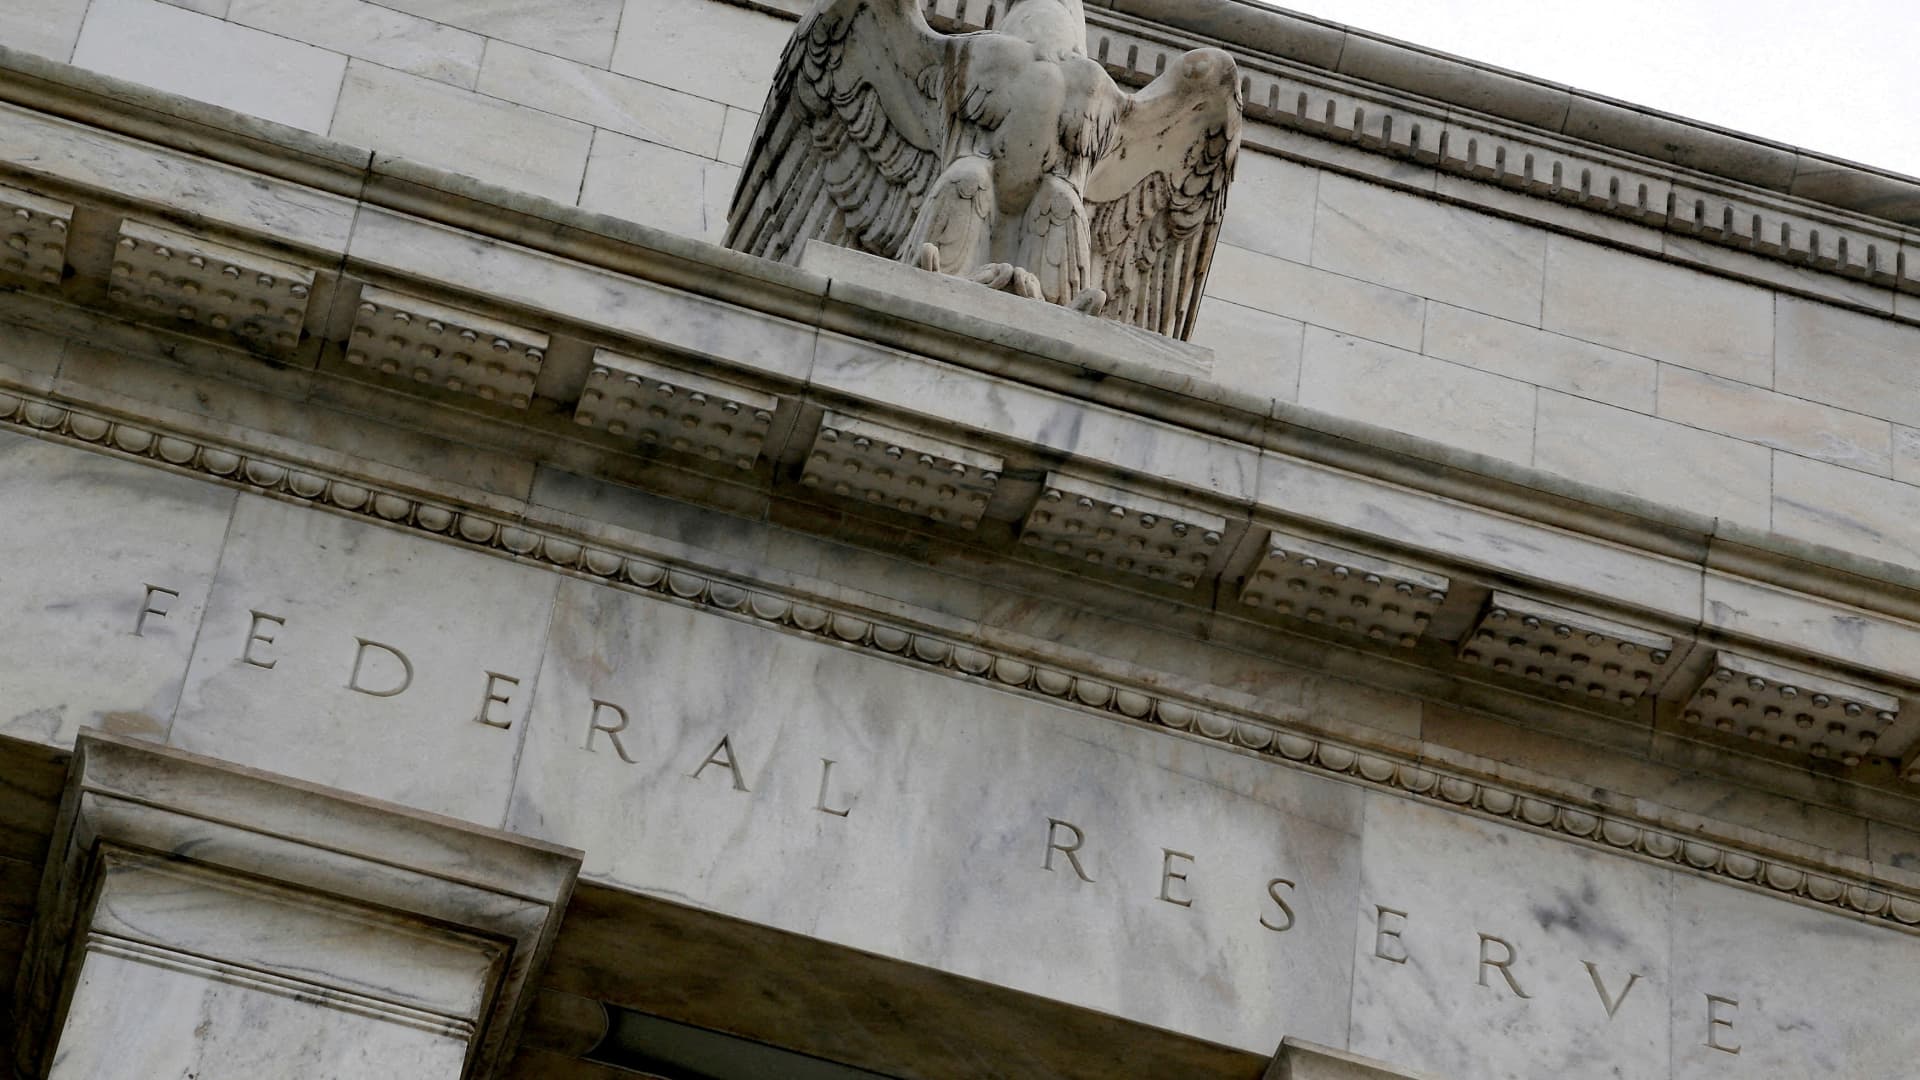 Jim Cramer says there's money to be made before the Fed cuts rates